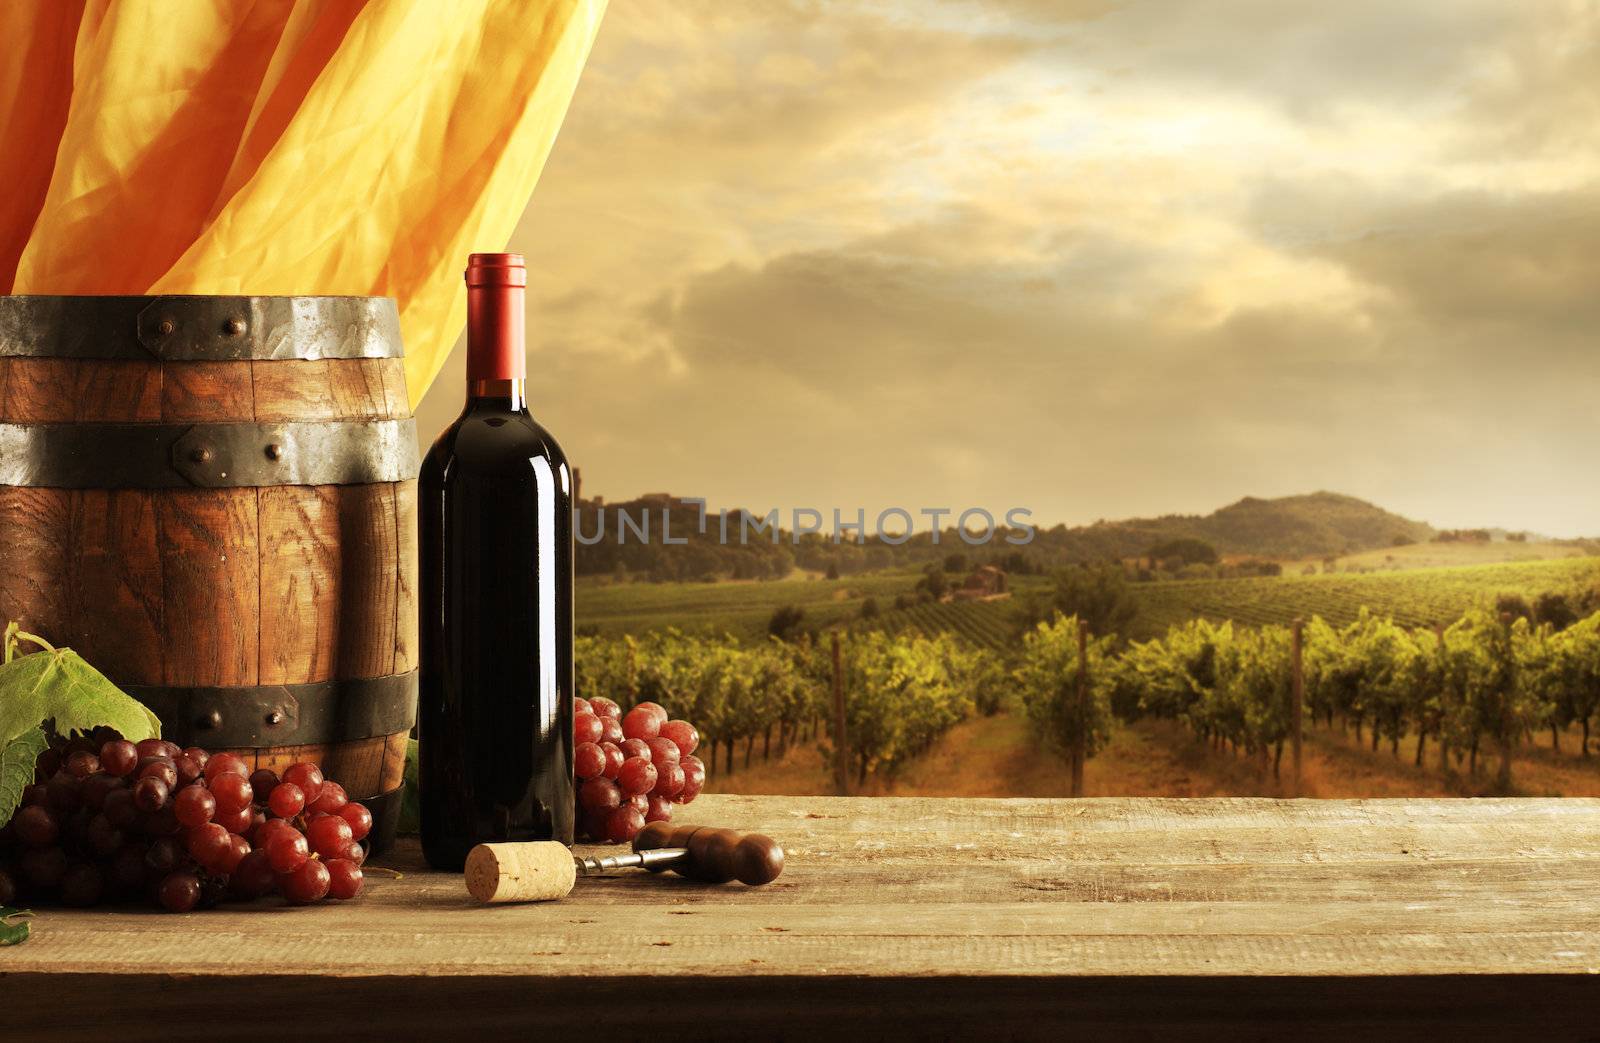 Red wine bottle, barrel and vineyard in sunset